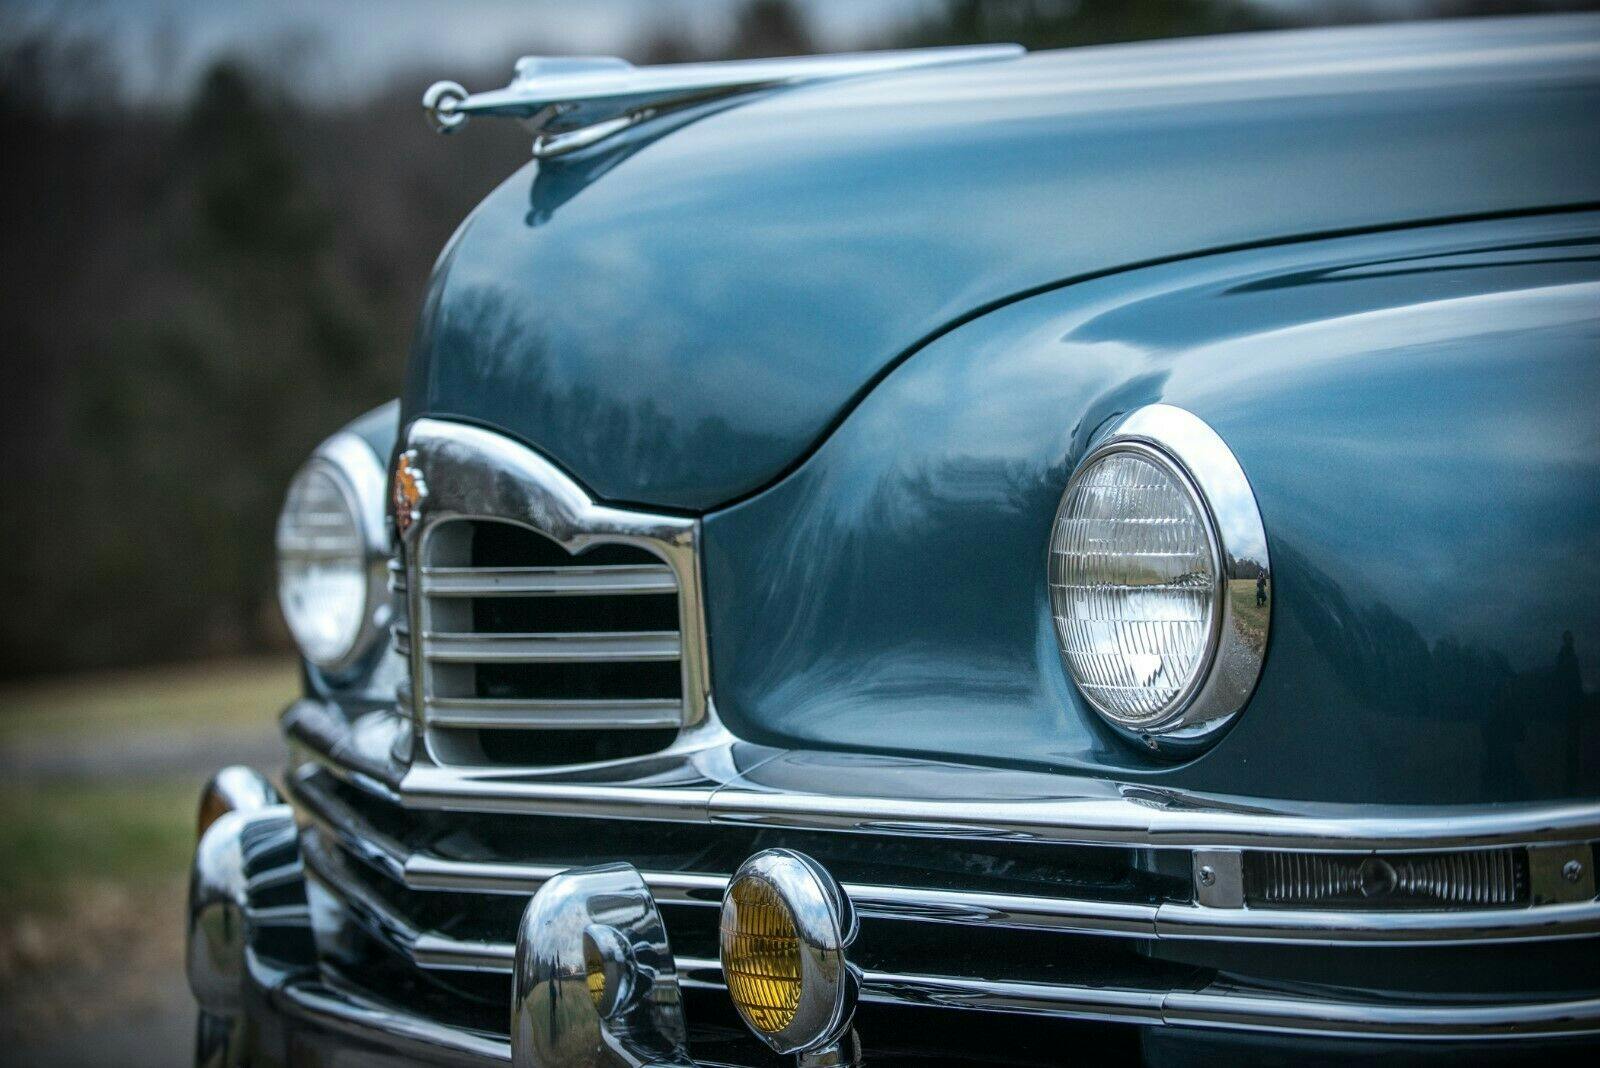 1949 Packard Deluxe Club Sedan - Close up grille